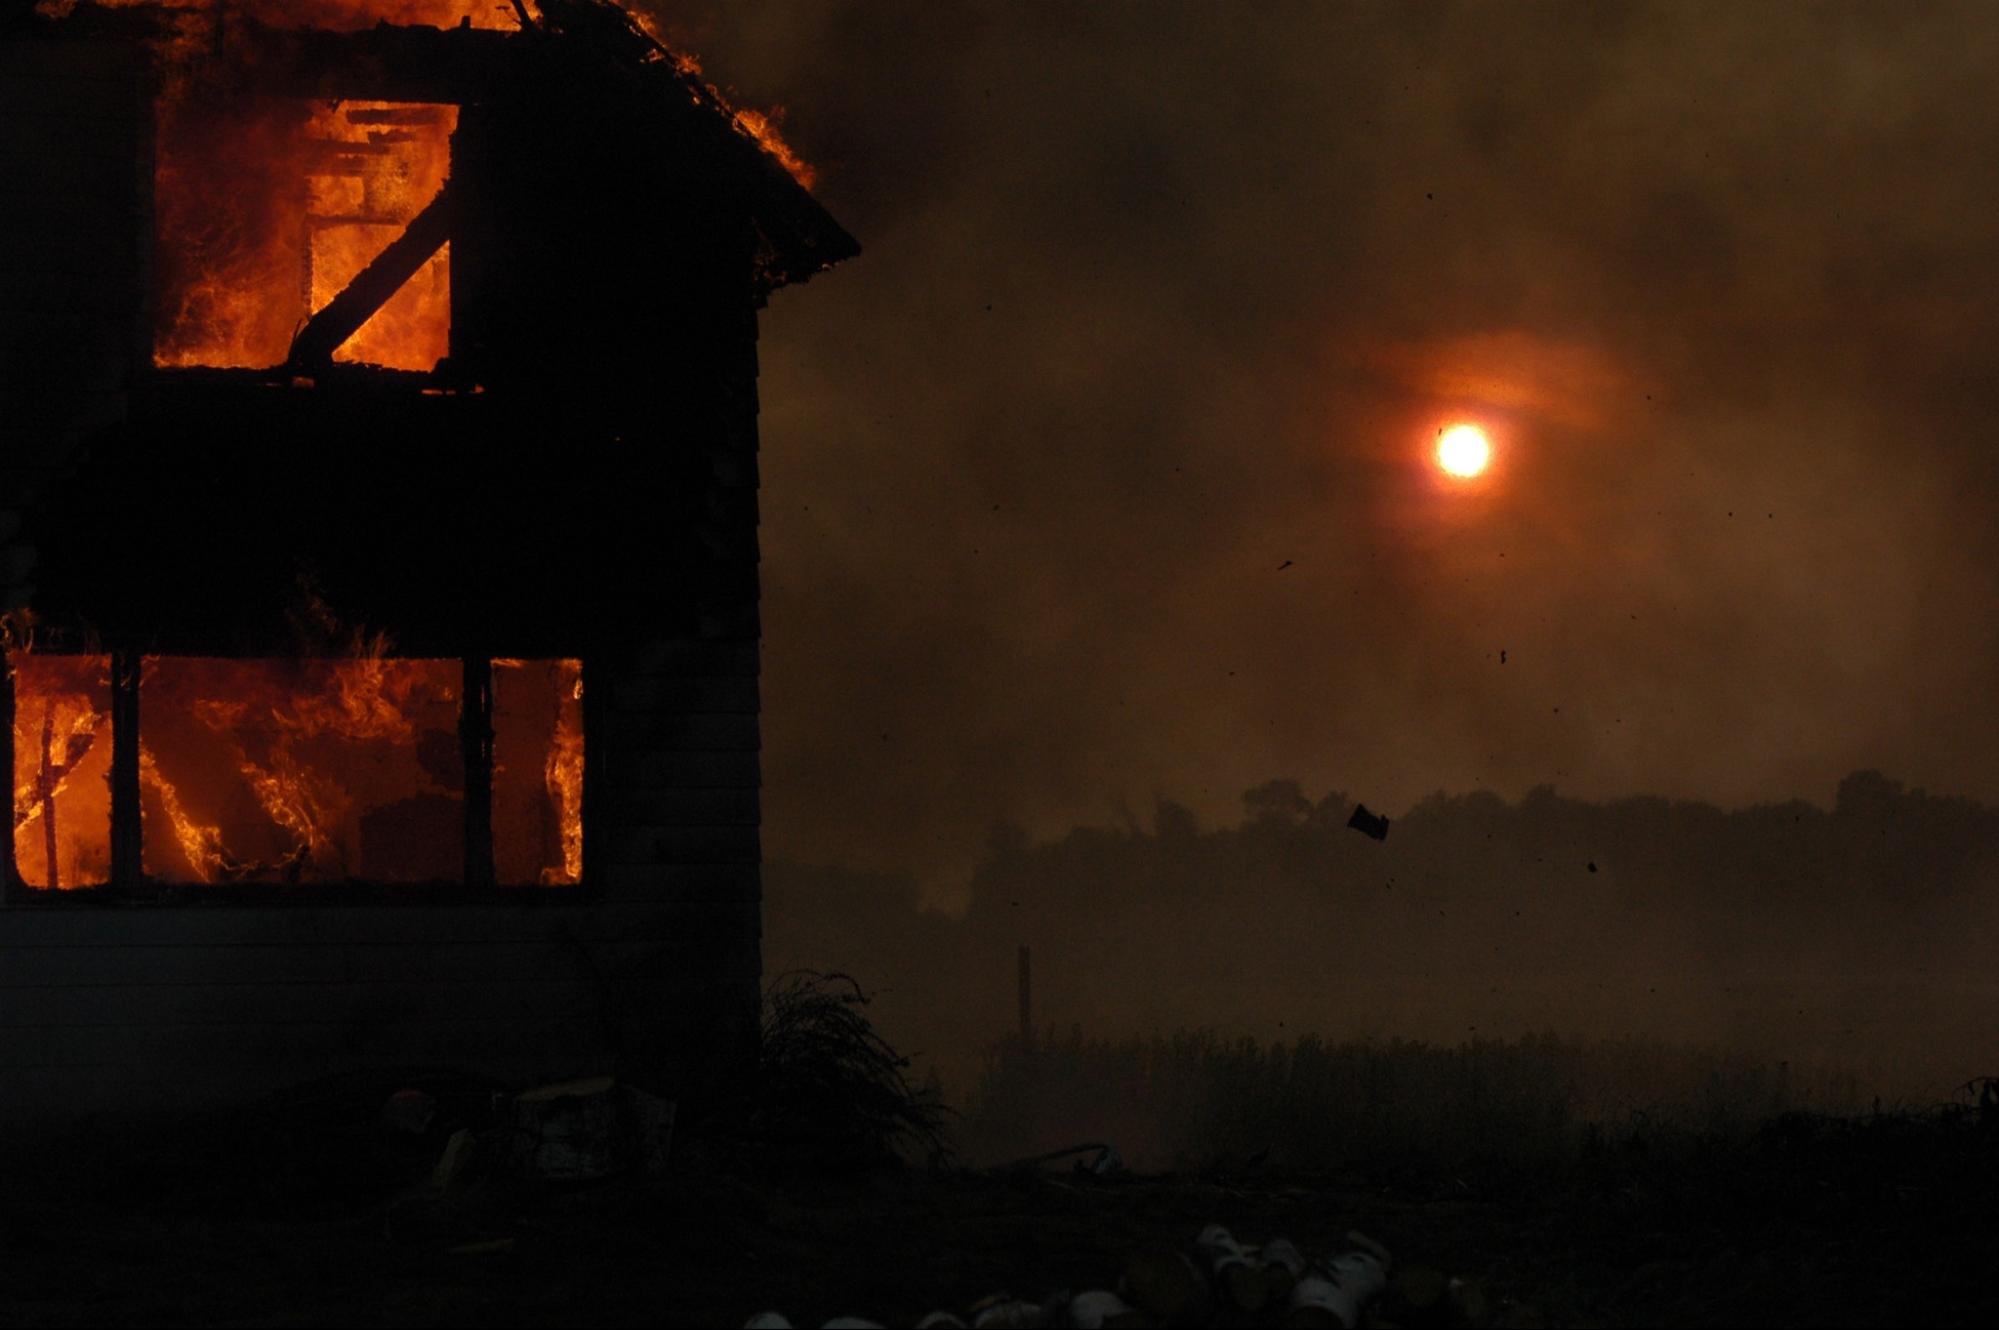 A house on fire with a red moon in the background.